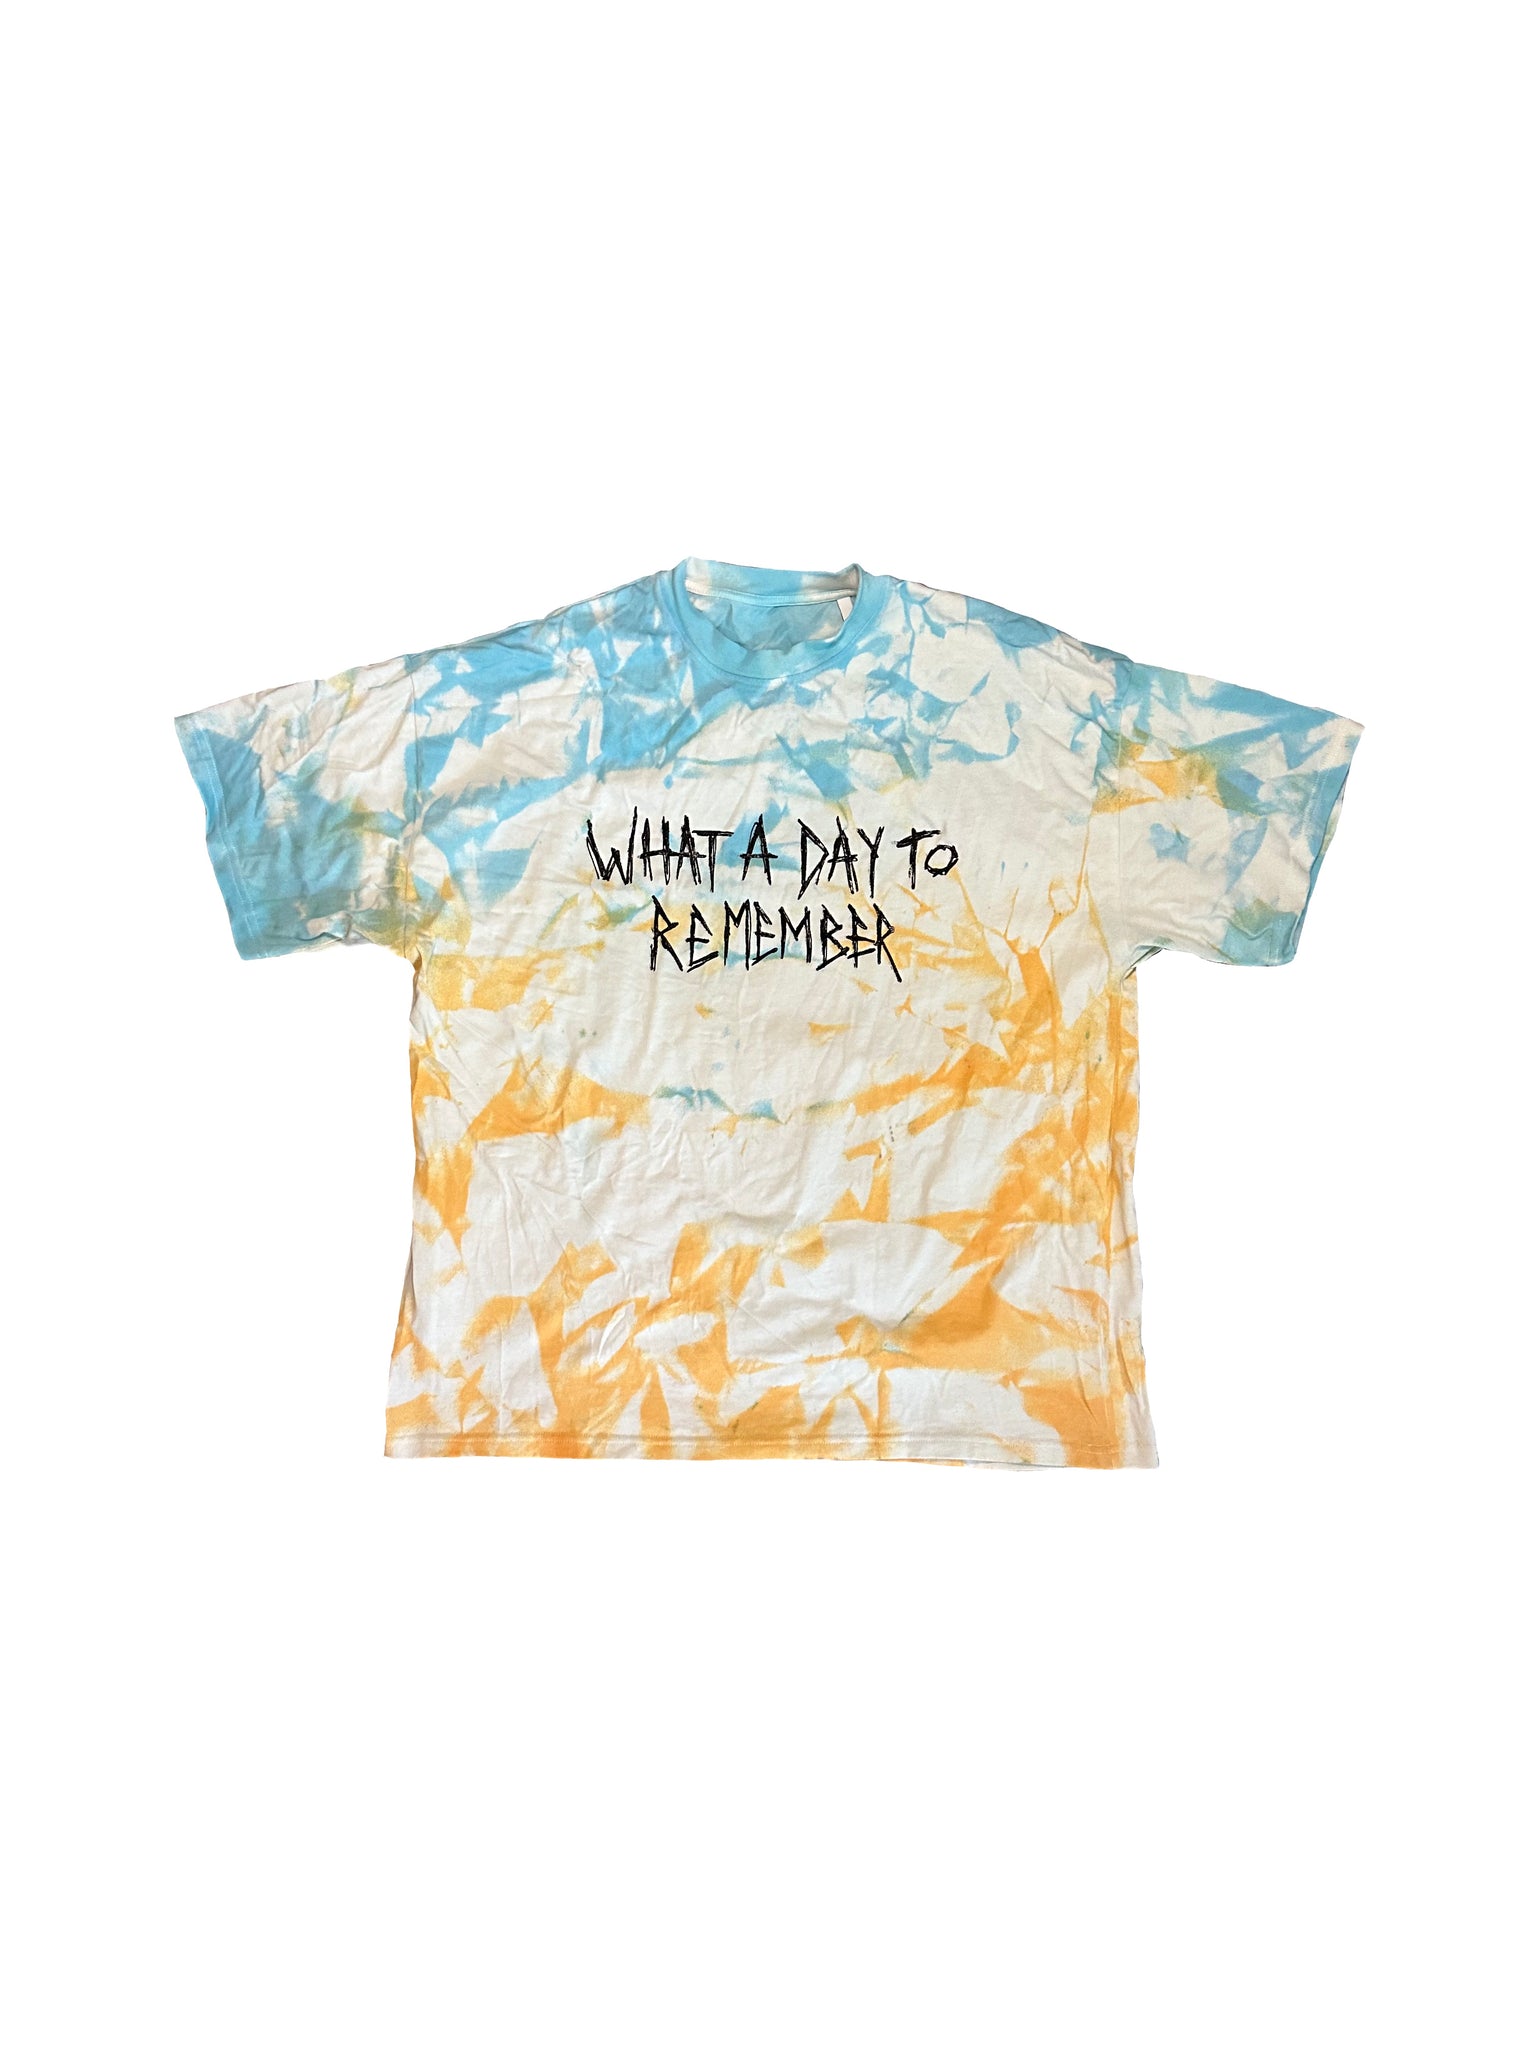 What a Day To Remember Tee (Large)